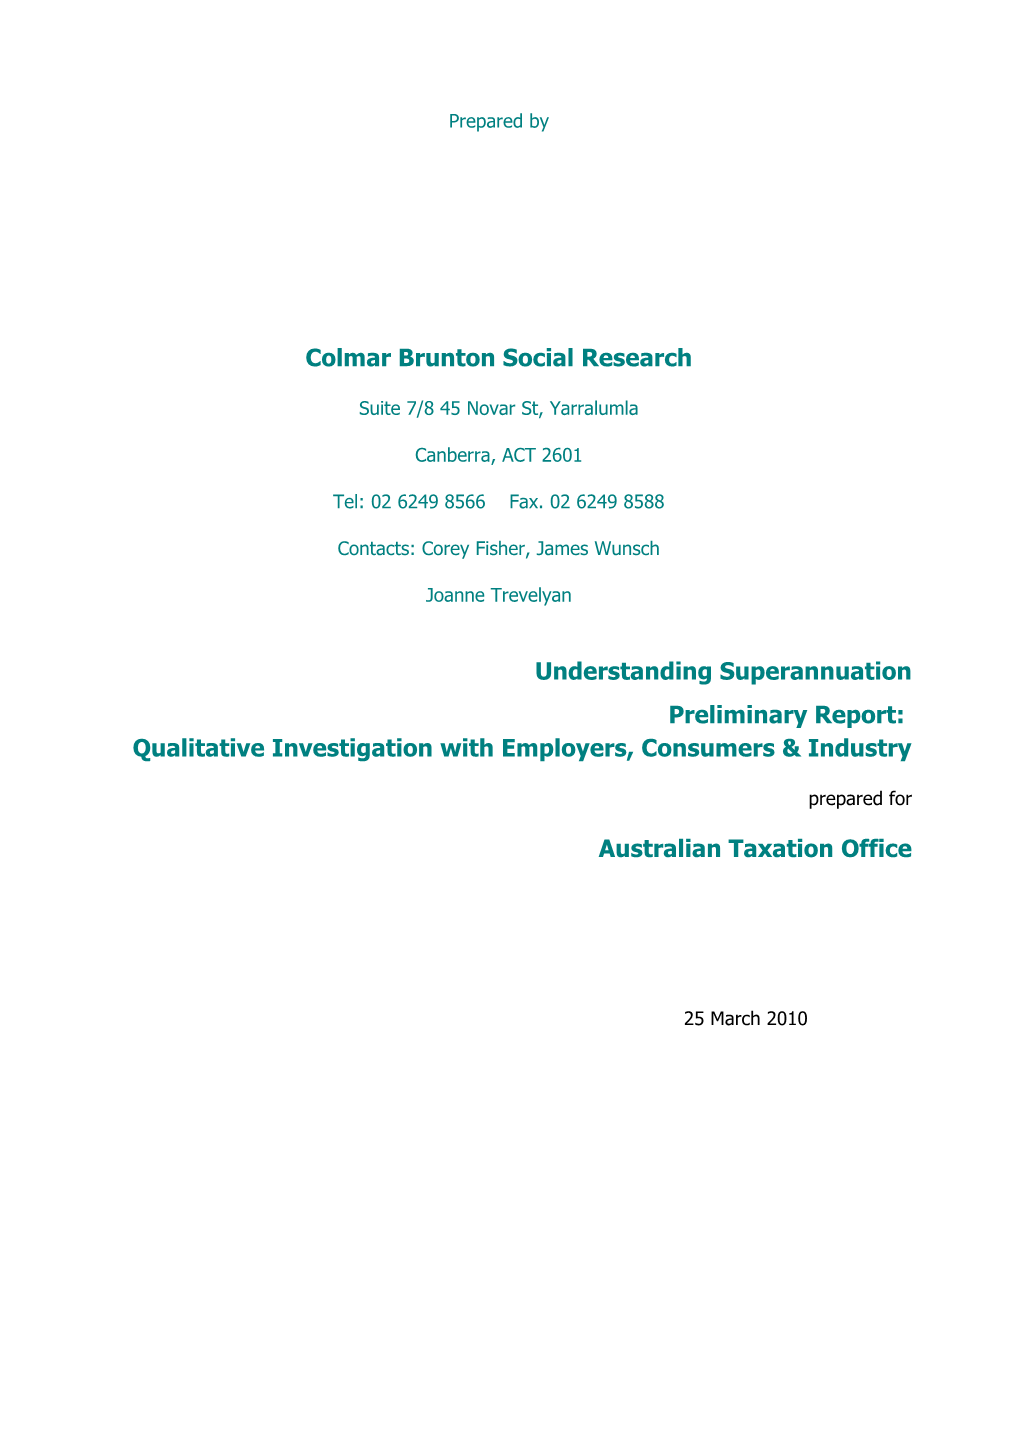 Understanding Superannuation - Preliminary Report: Qualitative Investigation With Employers, Consumers & Industry